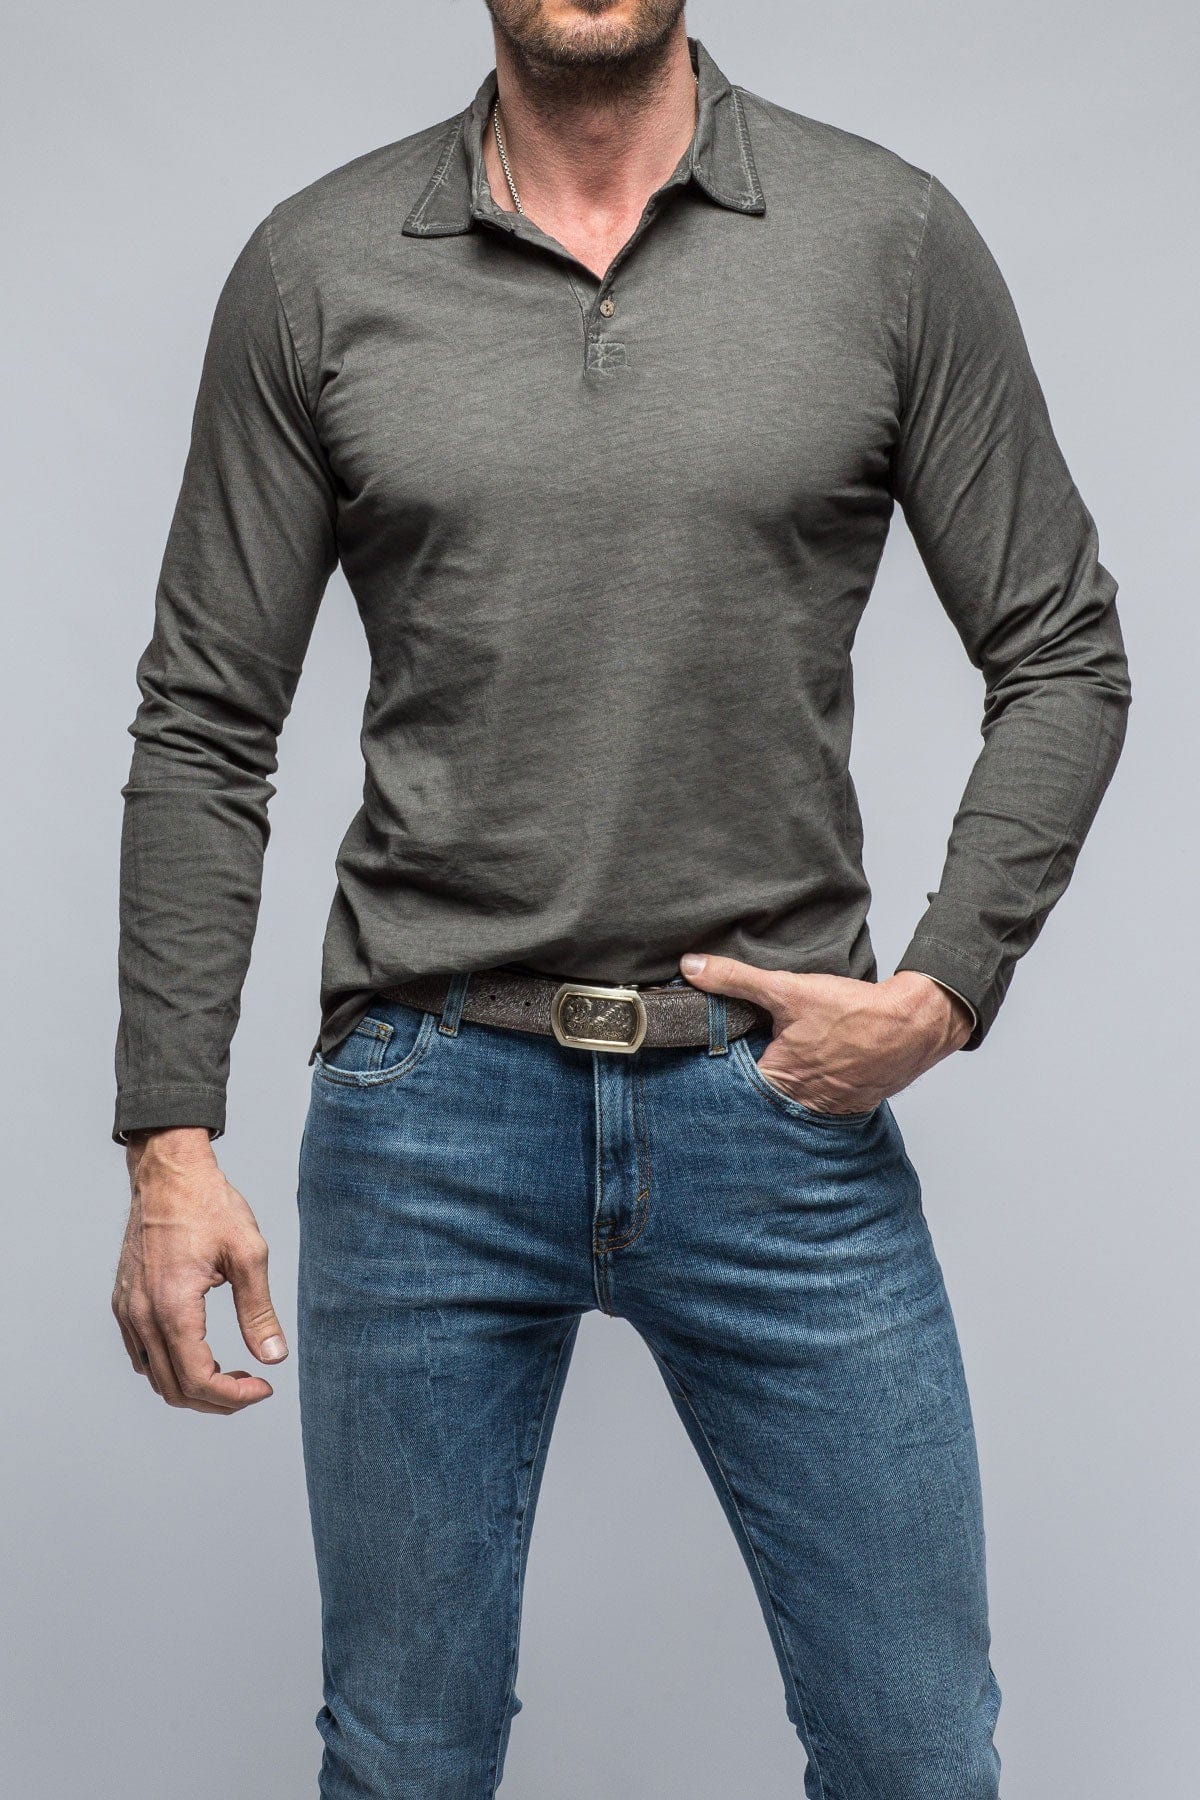 Torrance Long Sleeve Polo in Charcoal - AXEL'S